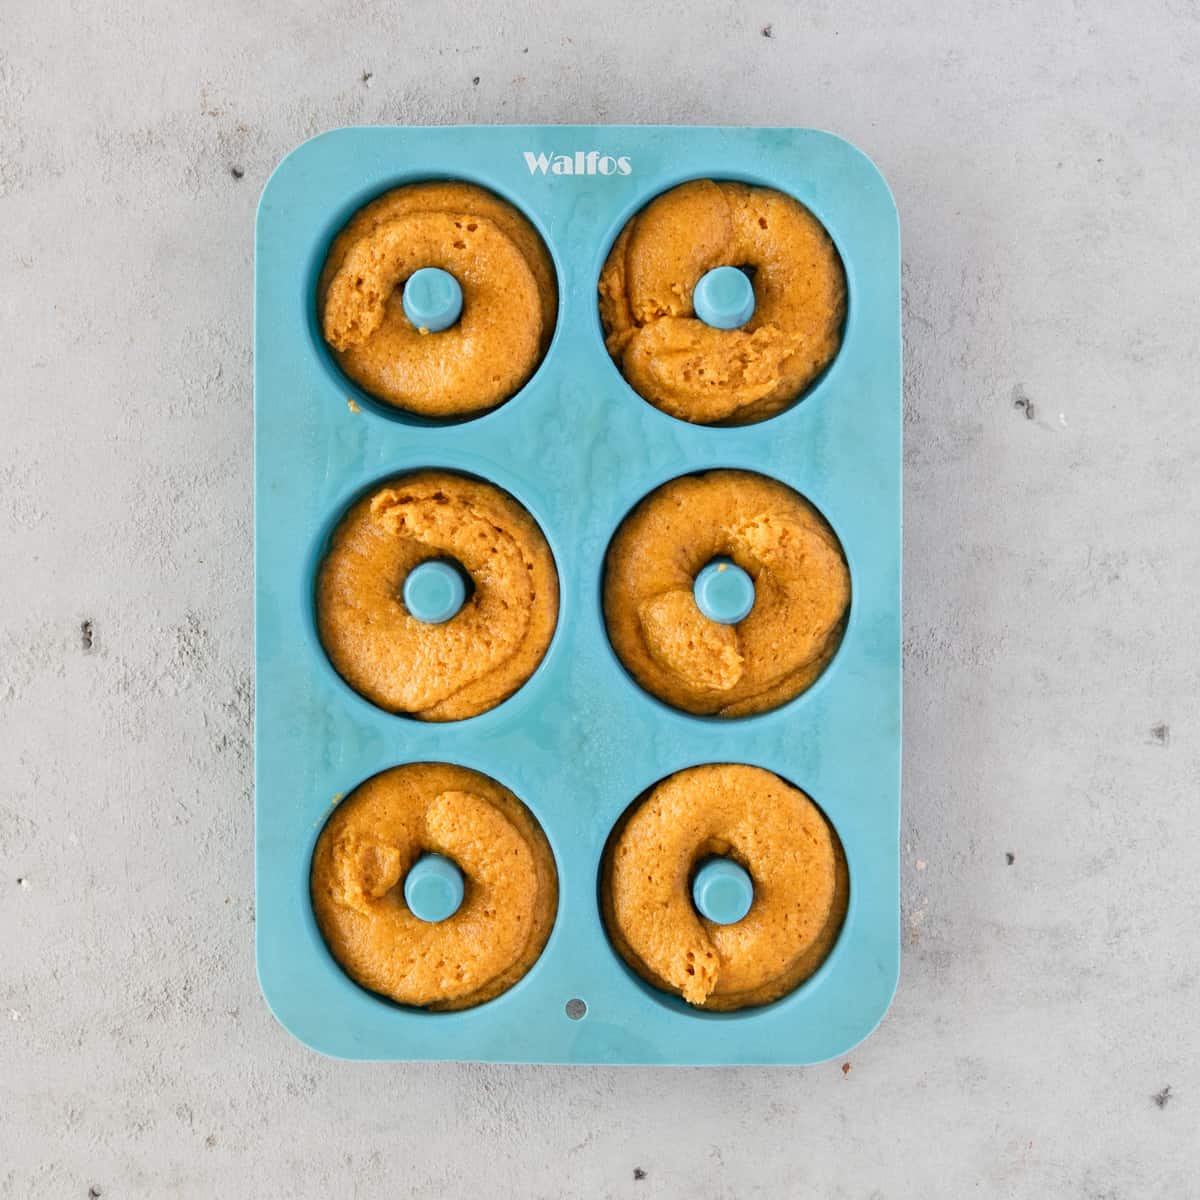 the pumpkin donut batter piped into a silicone donut mold before baking.